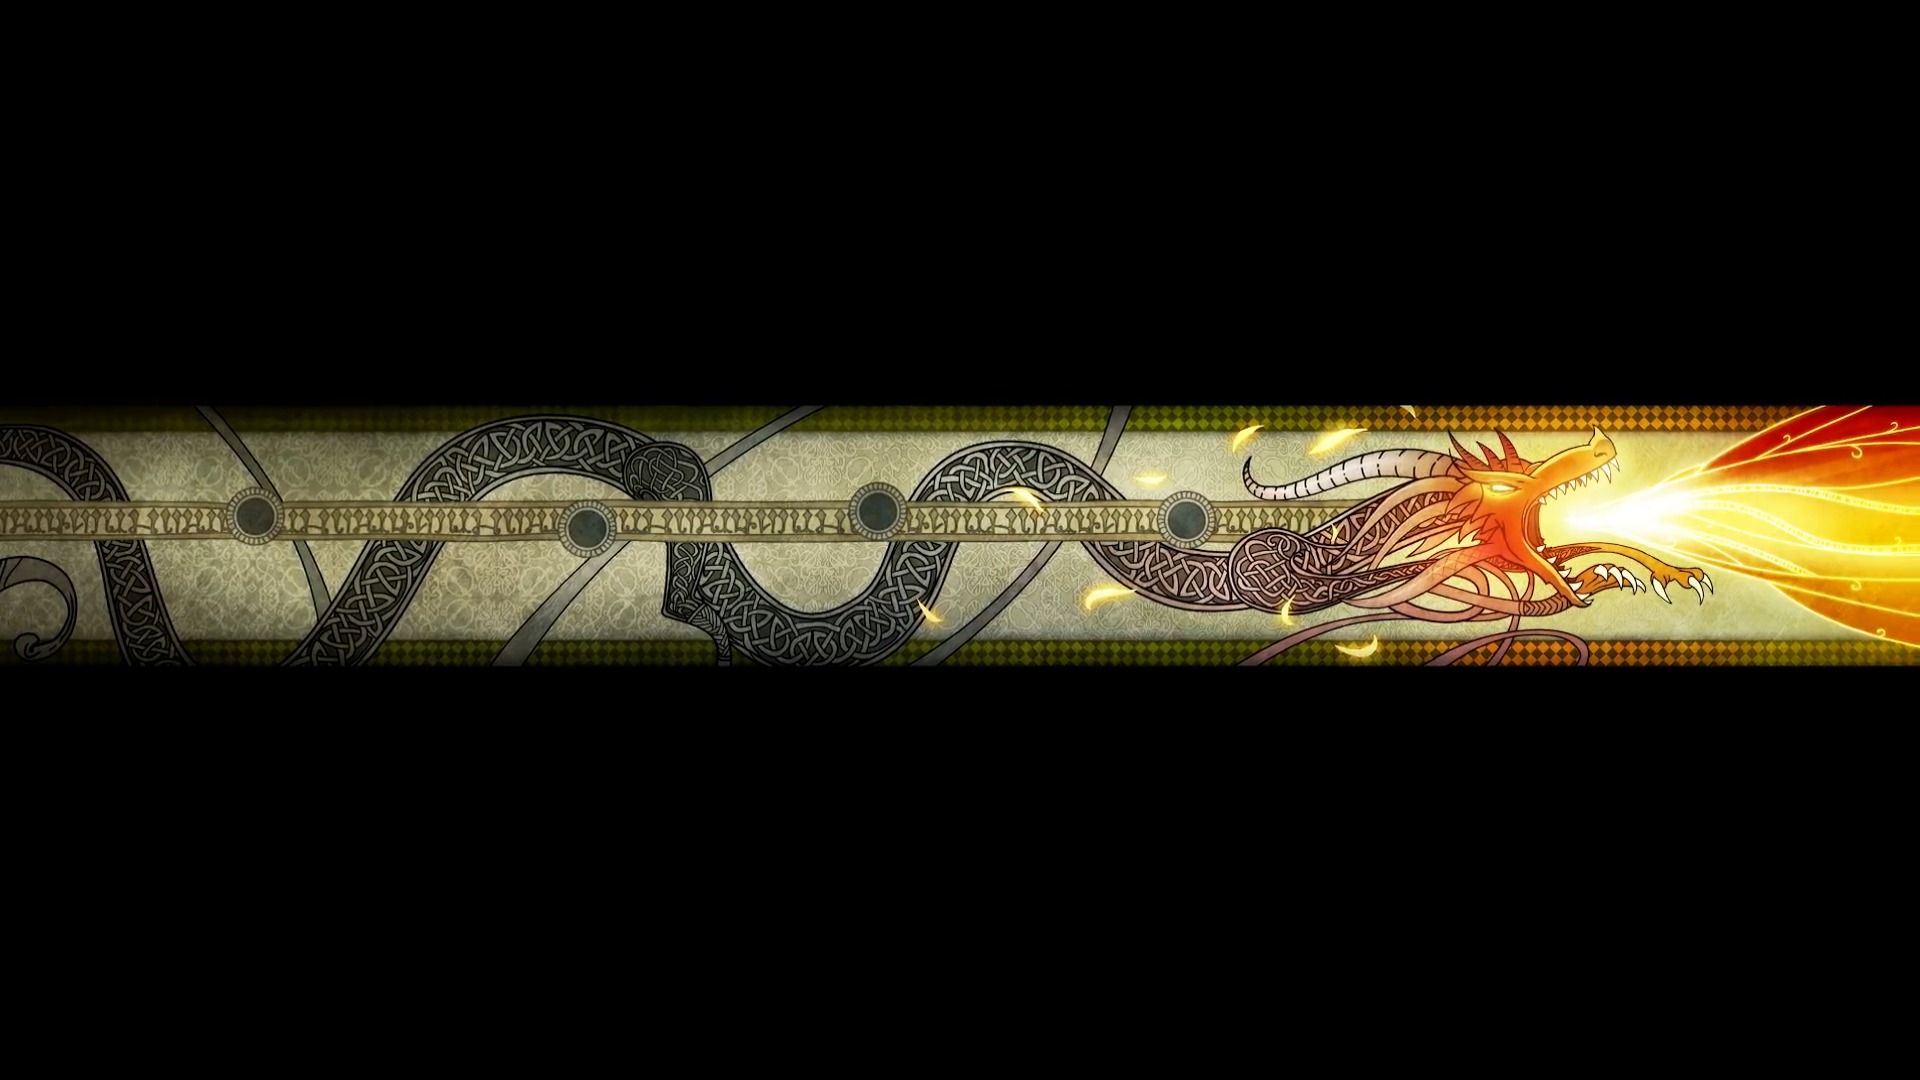 Download wallpaper Dragon, Flame, Art, Black, Texture, Wallpaper, The  Wallpapers, Counter-Strike: Global Offensive, CS GO, AWP, Counter Strike,  Counterstrike, Dragon Lore Skins, Skin Dragon ENT, Dragon Lore, section  textures in resolution 1920x1080